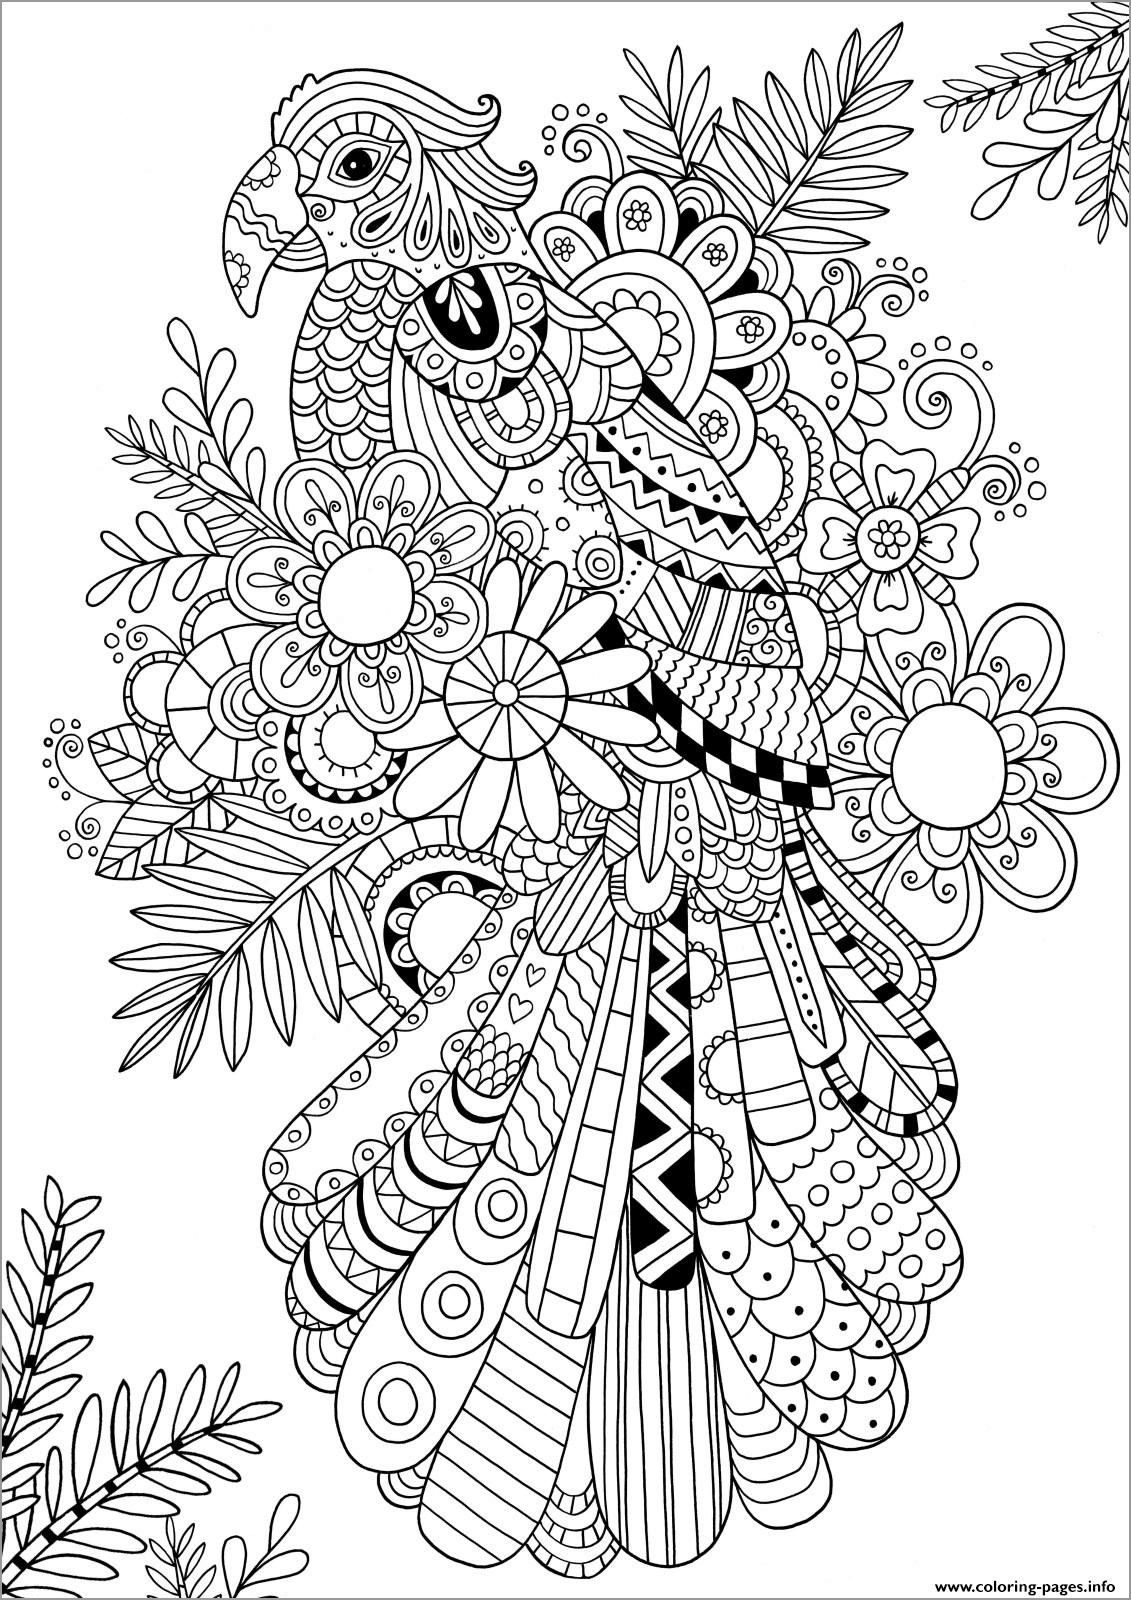 Zentangle Parrot Coloring Page for Adult